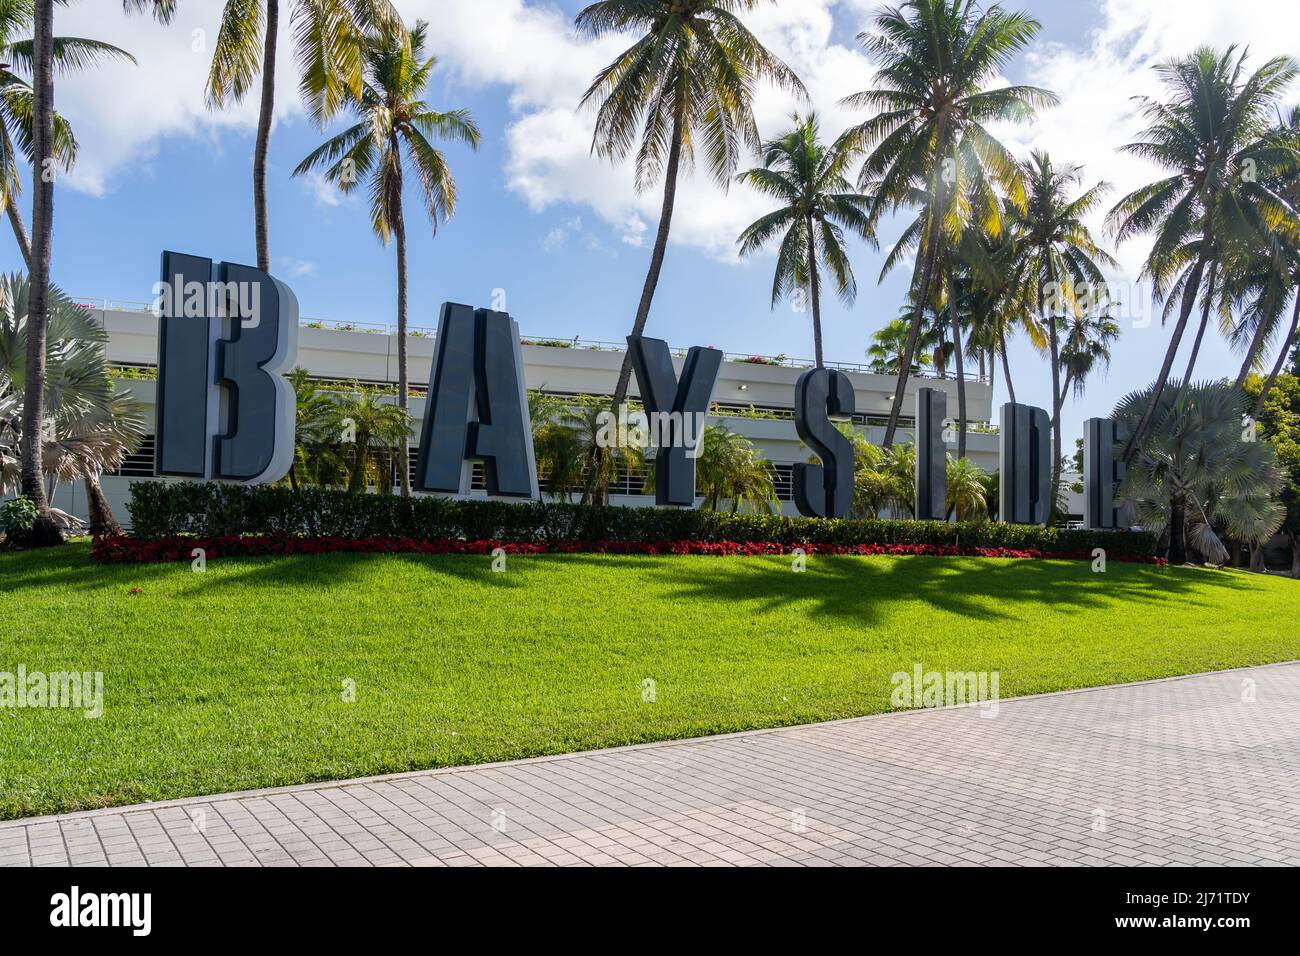 Miami, Florida, USA - January 2, 2022: Bayside sign is shown in  Miami, Florida, USA. Bayside Marketplace is a two-story open air shopping center. Stock Photo